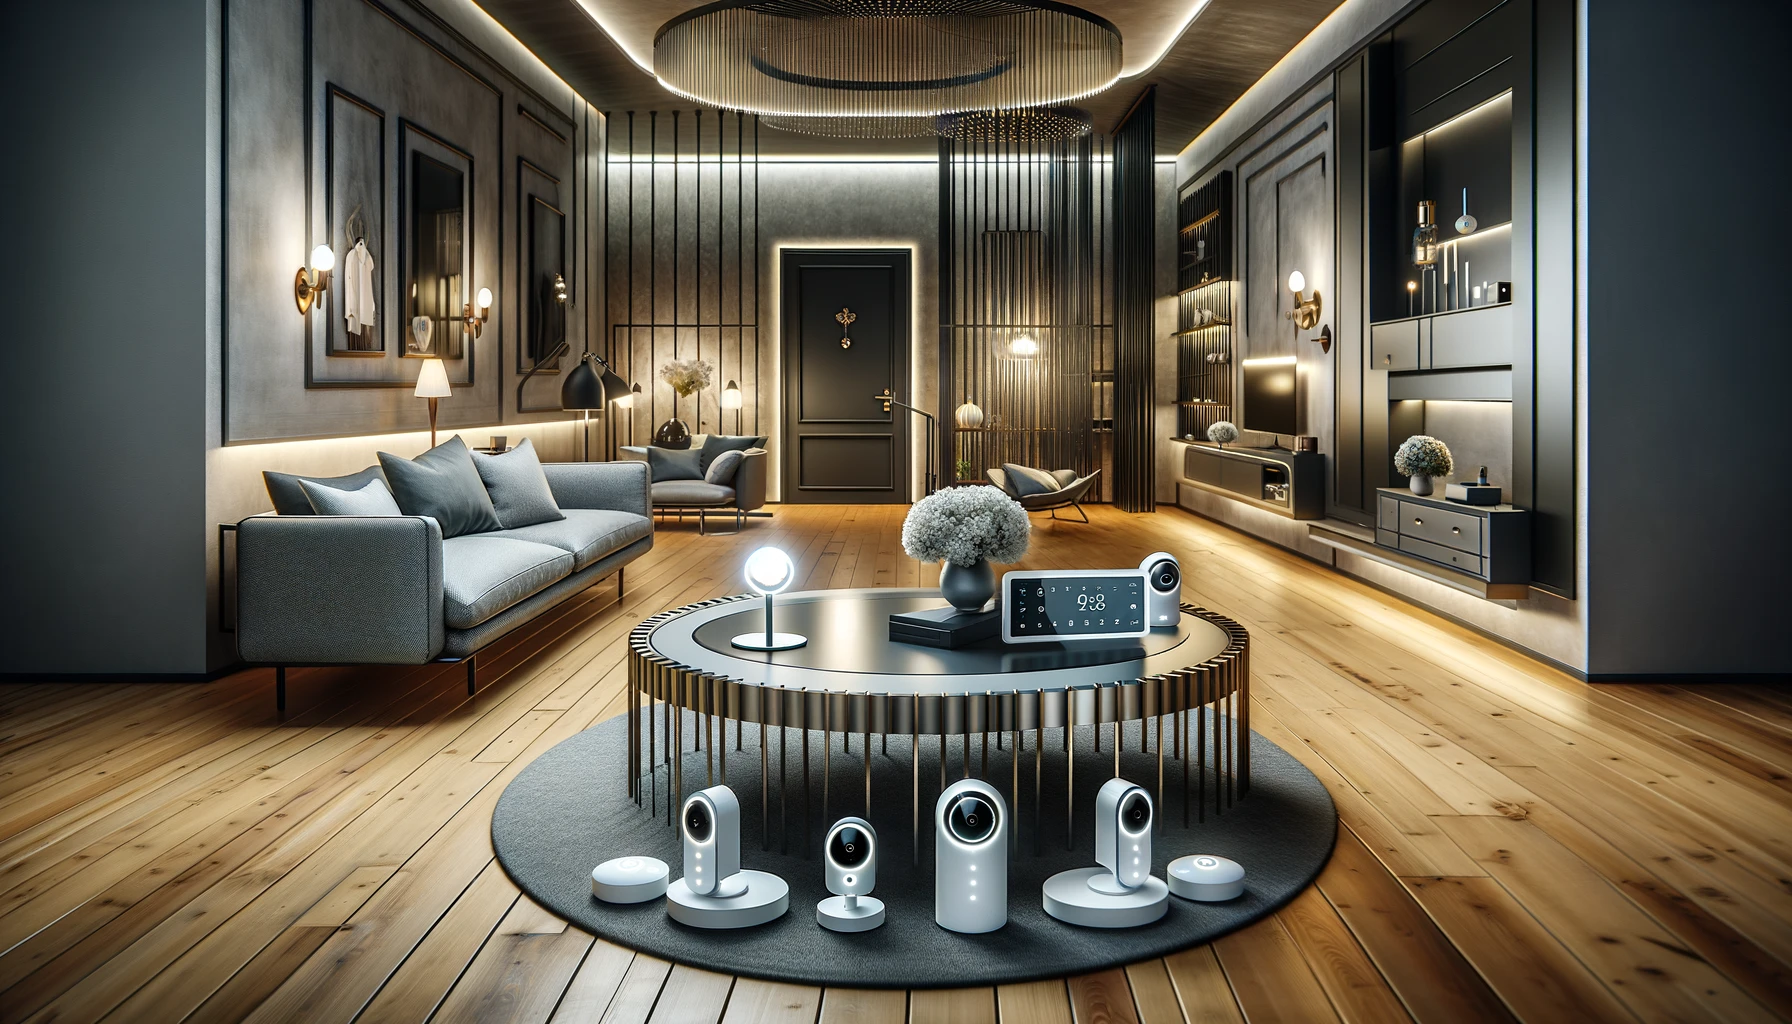 Modern living room with integrated smart home security system, featuring a central hub, smart cameras, smart locks, and sensors, emphasizing luxury and advanced technology.